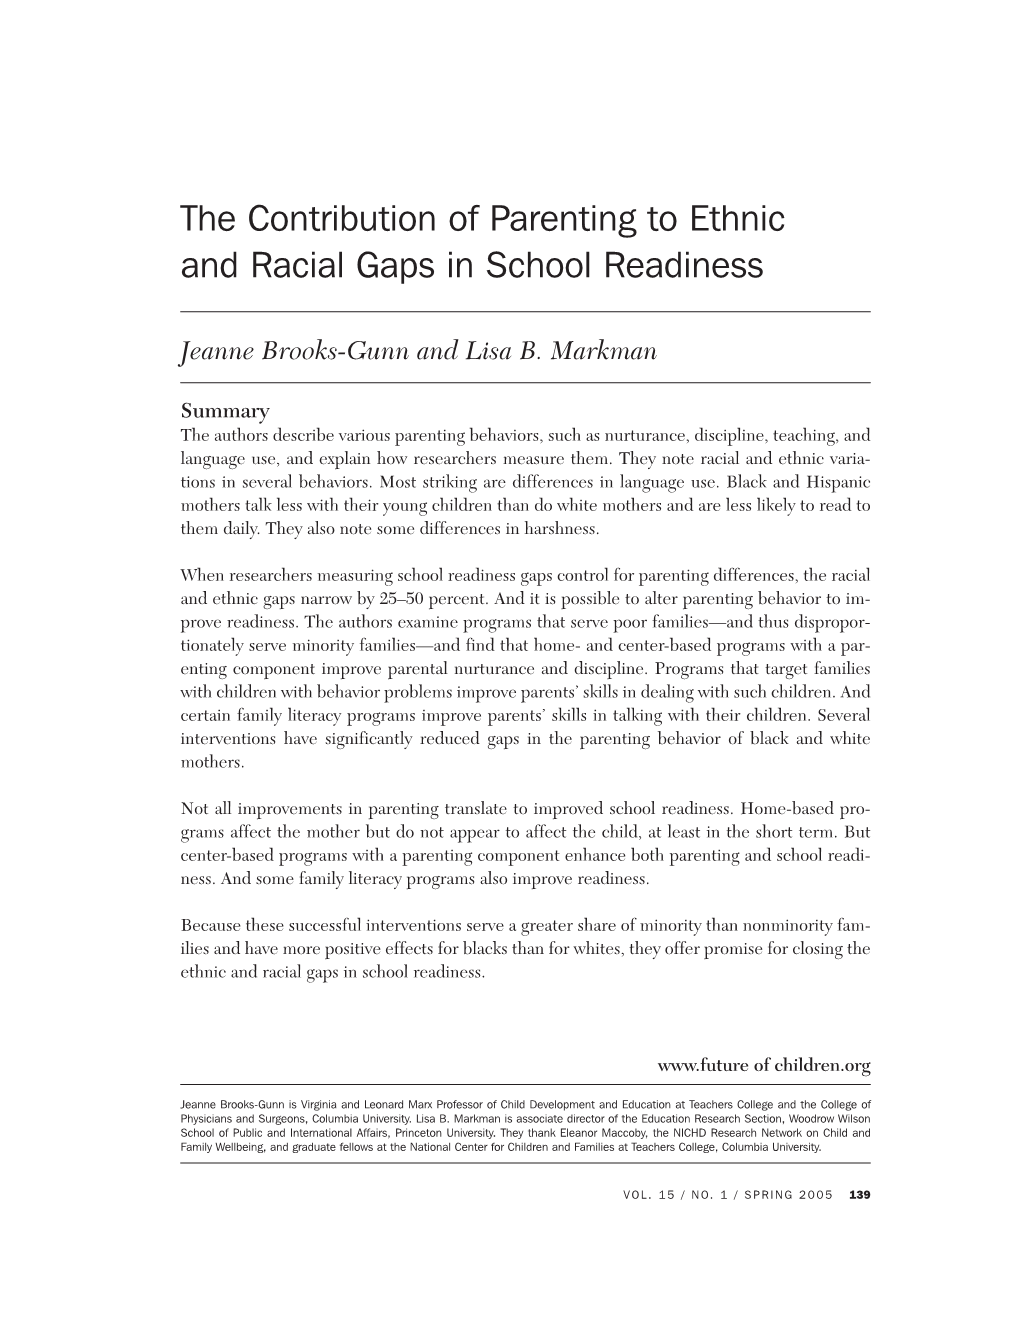 The Contribution of Parenting to Ethnic and Racial Gaps in School Readiness